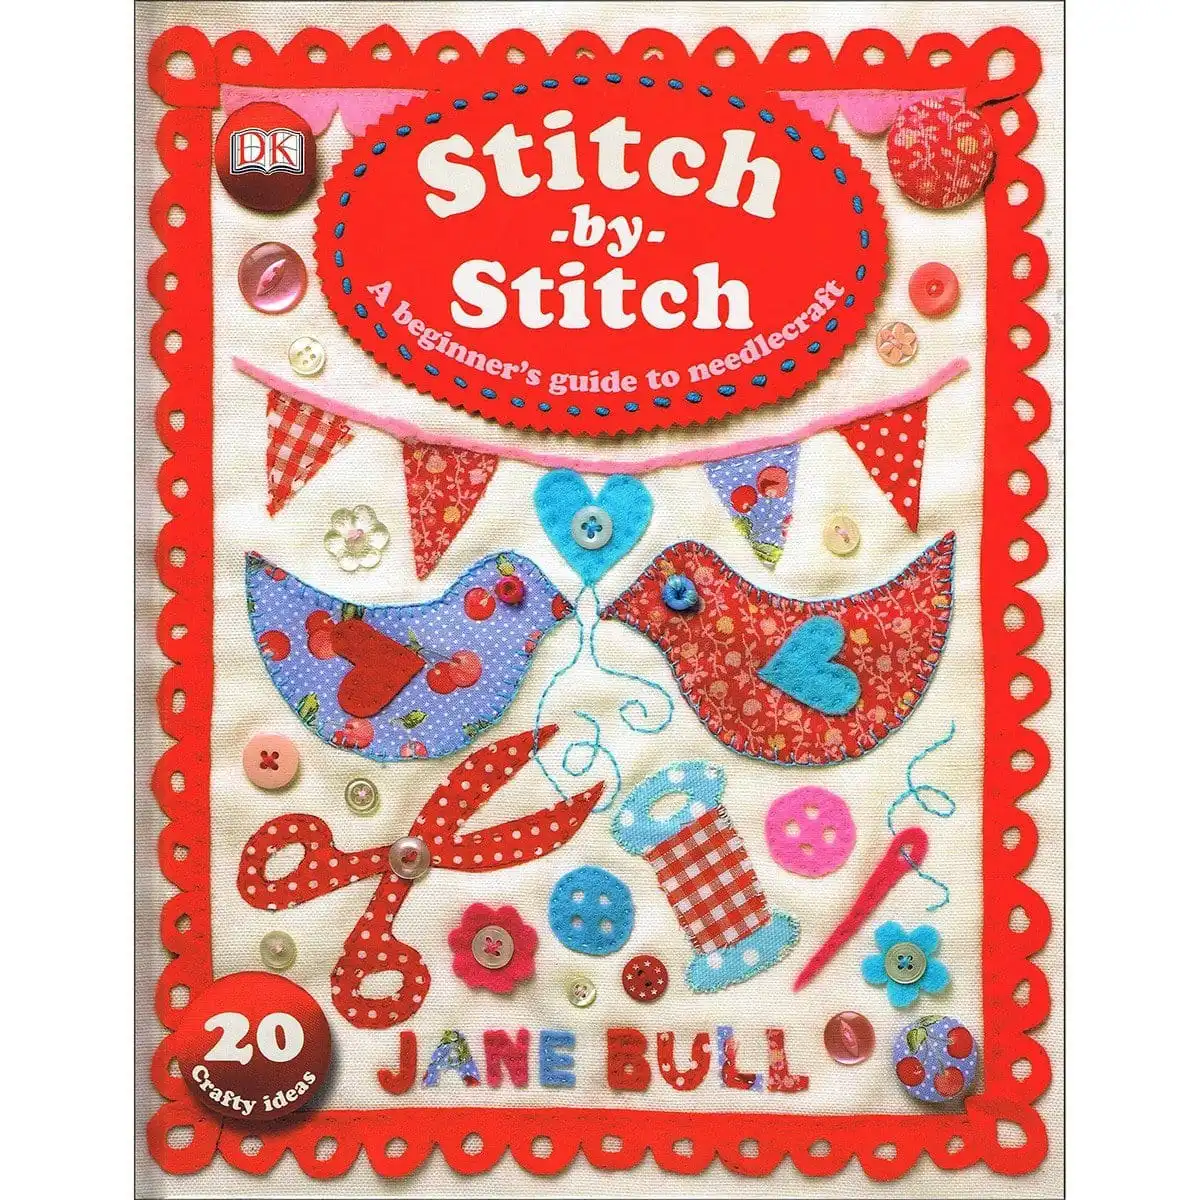 Promotional Stitch-by-stitch - A Beginner's Guide To Needlecraft